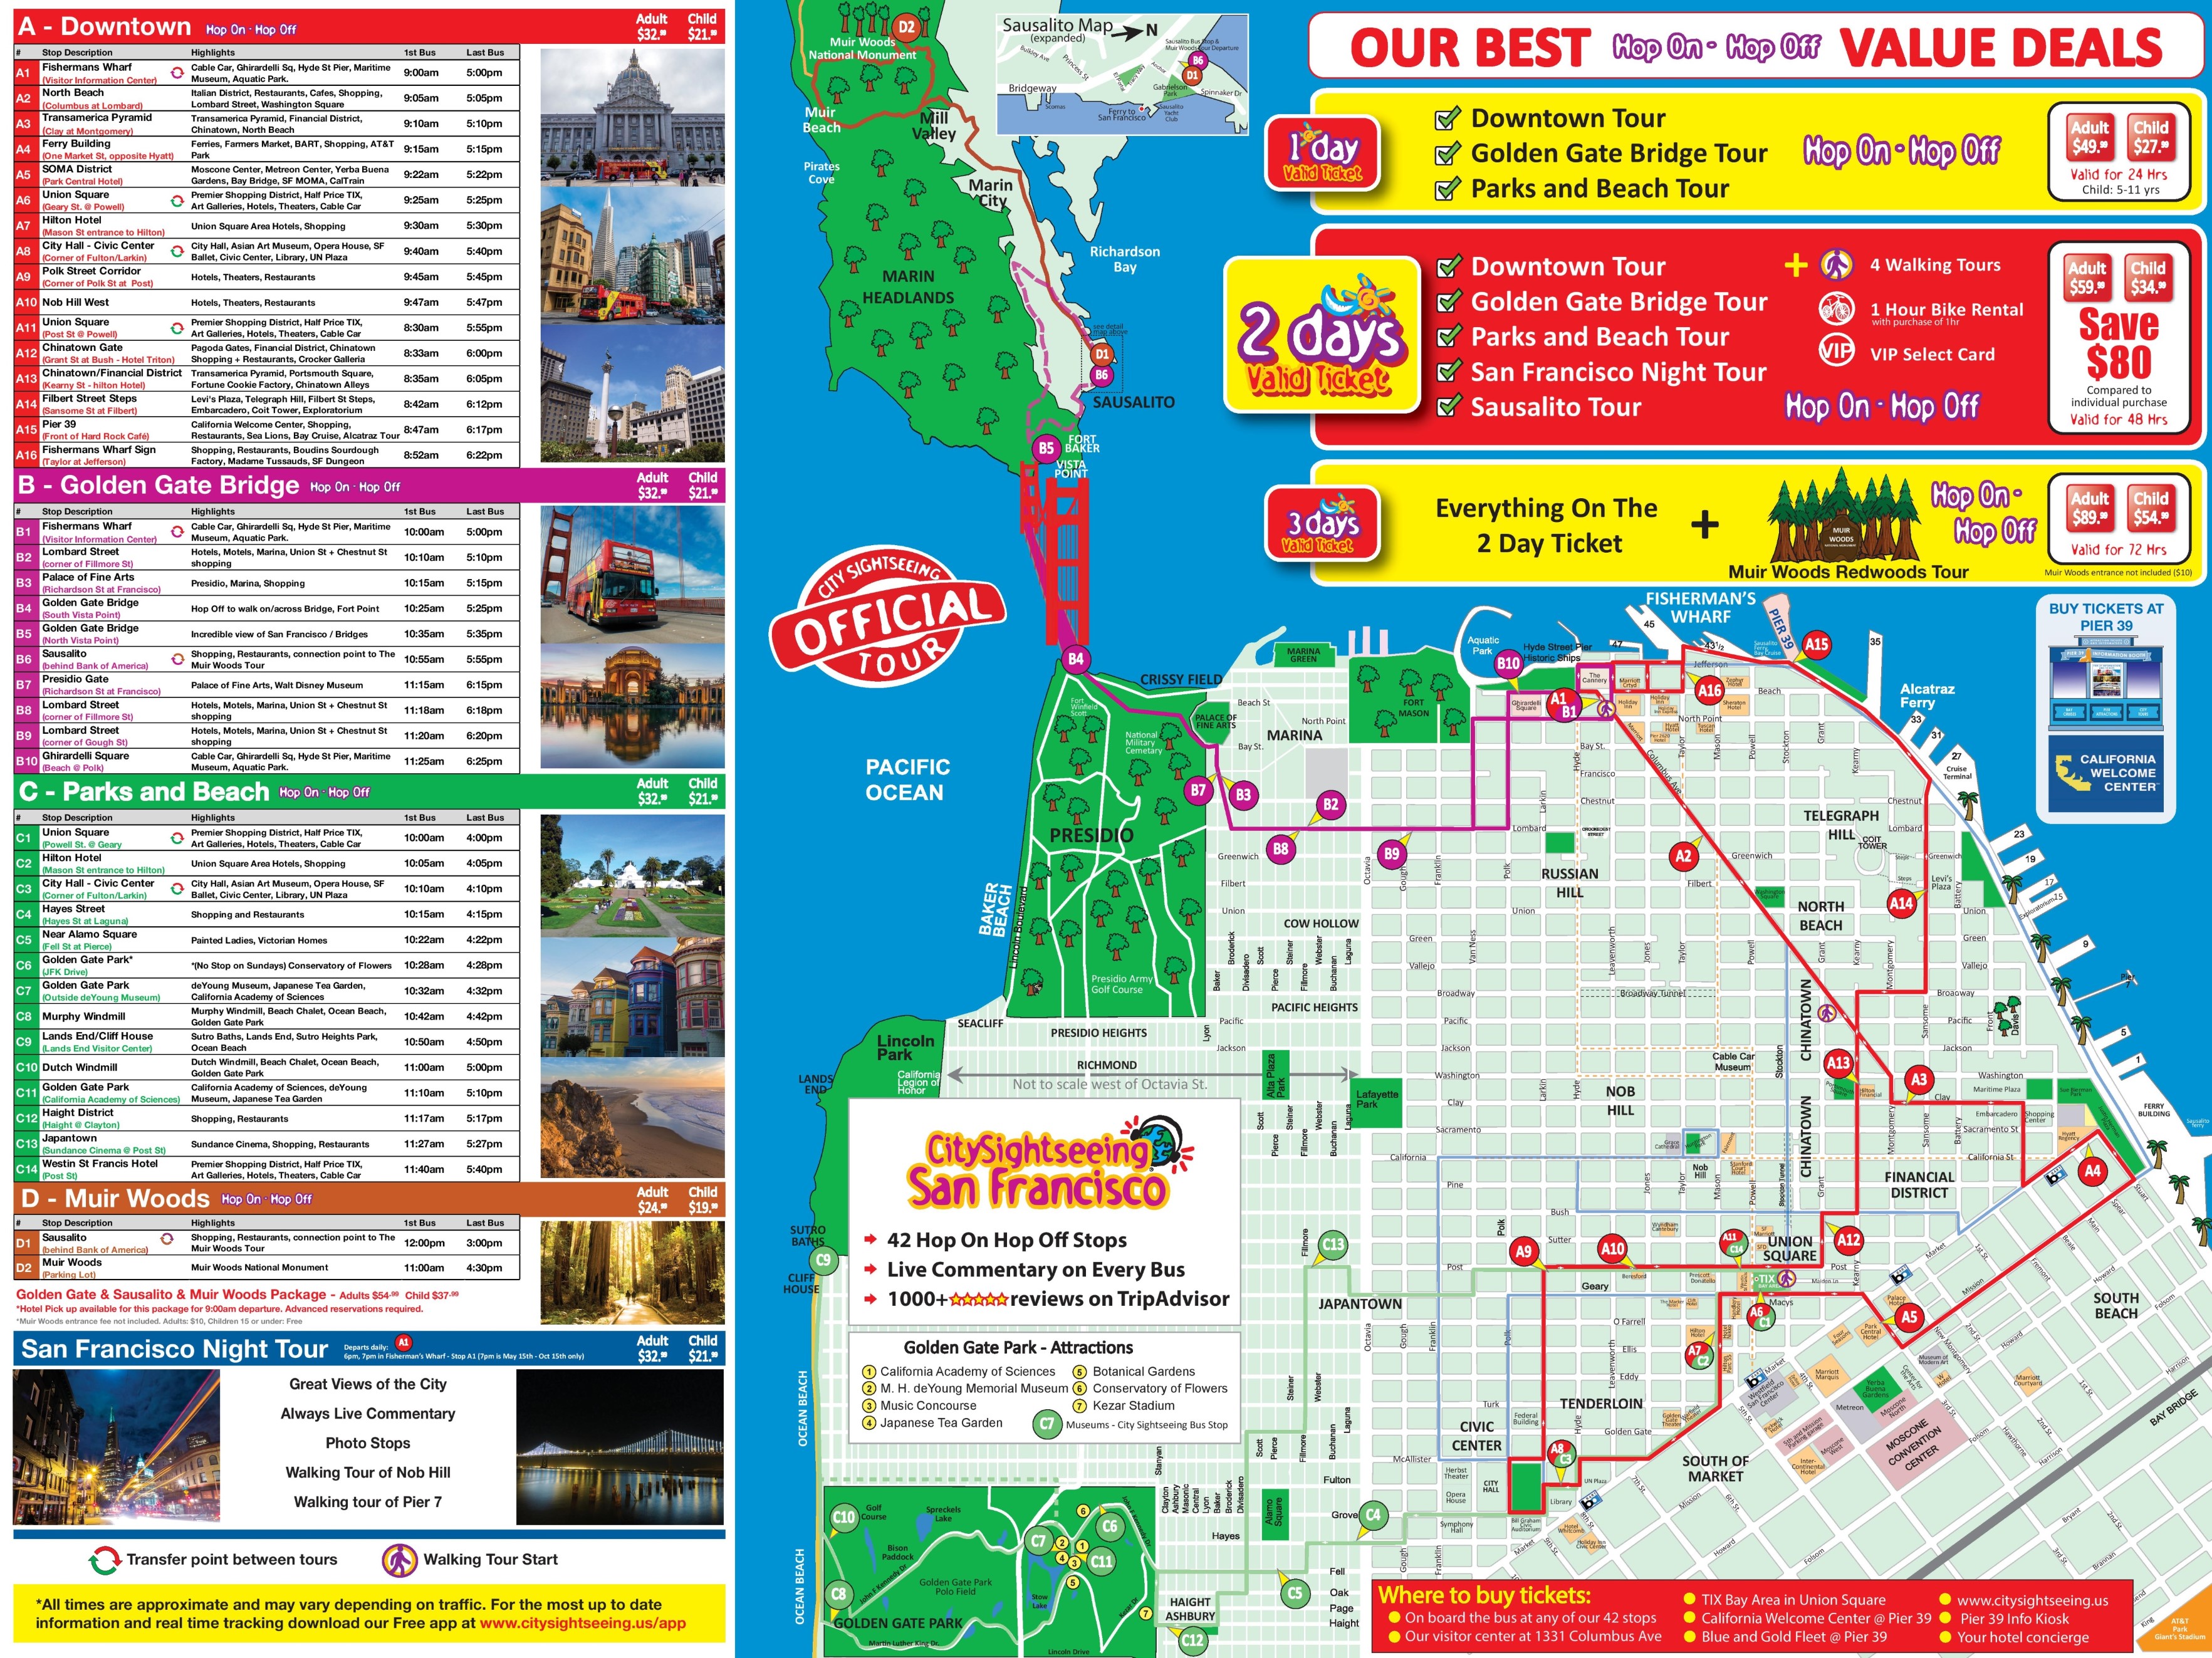 San Francisco tourist attractions map5043 x 3780